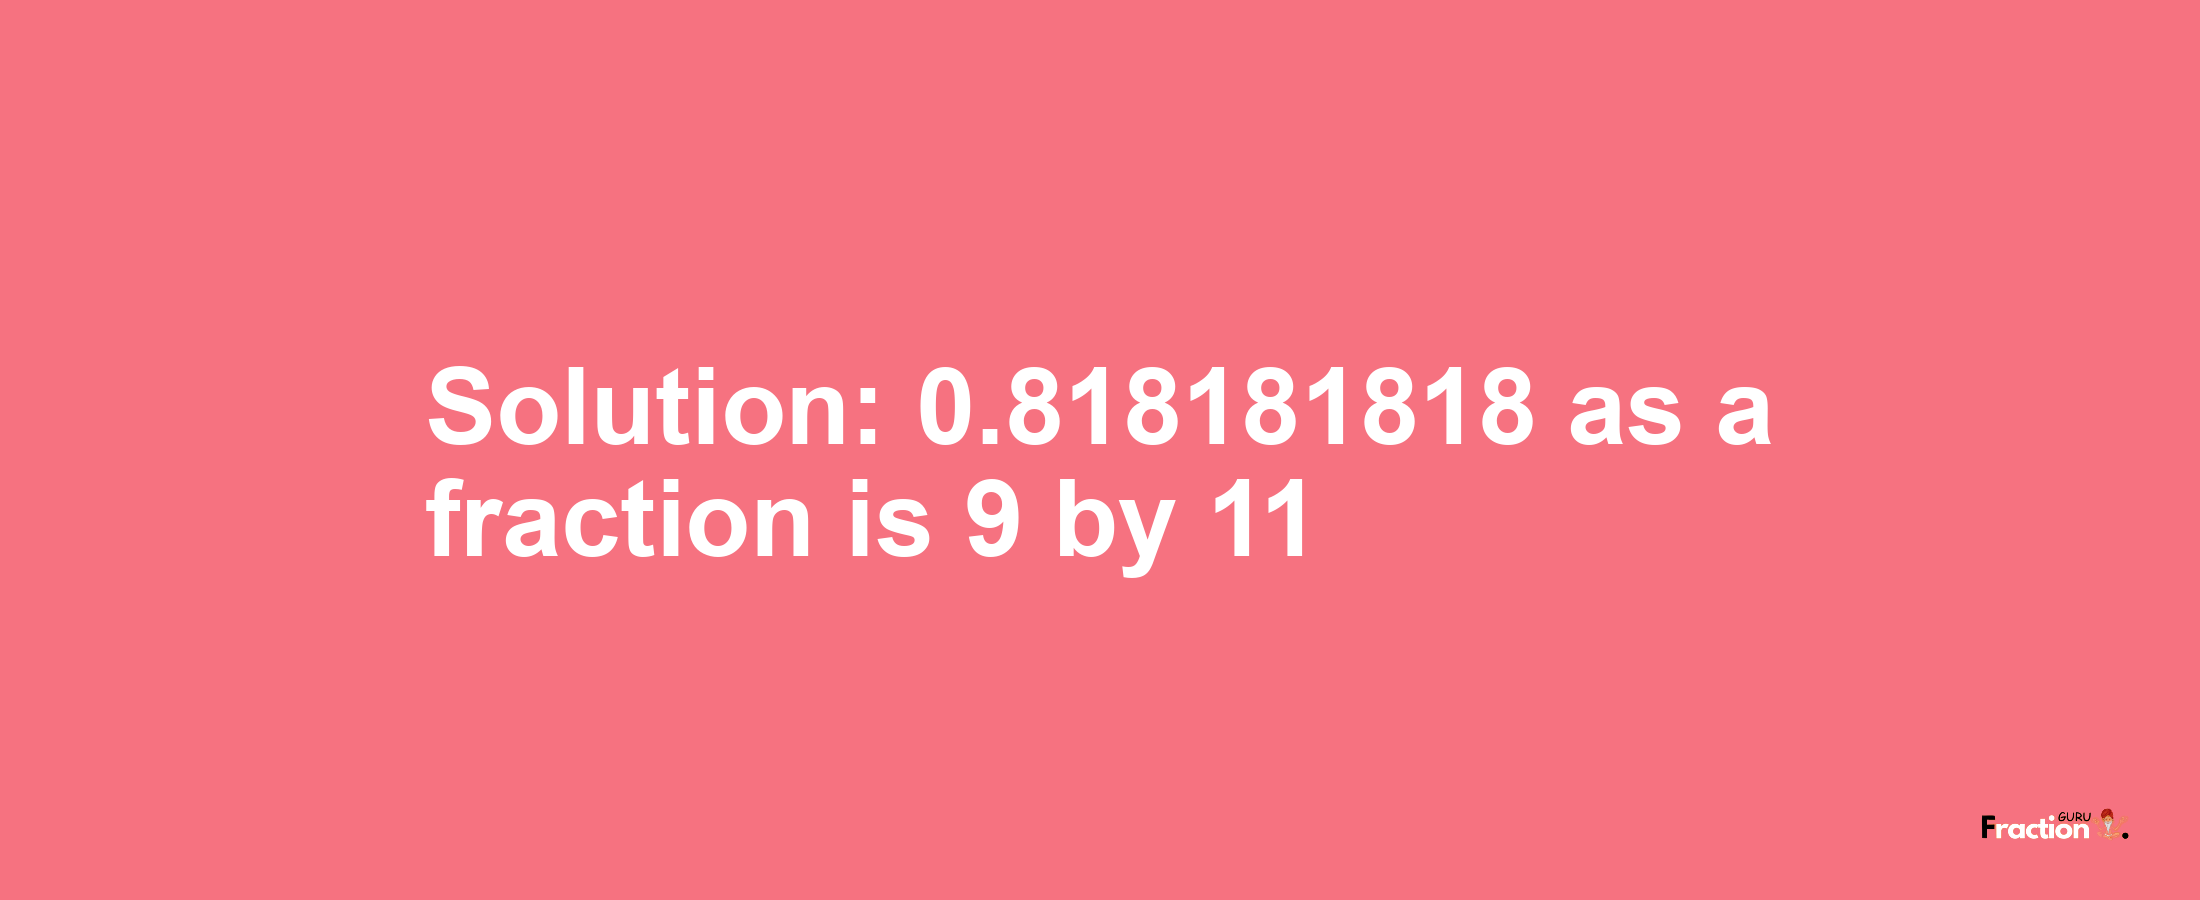 Solution:0.818181818 as a fraction is 9/11